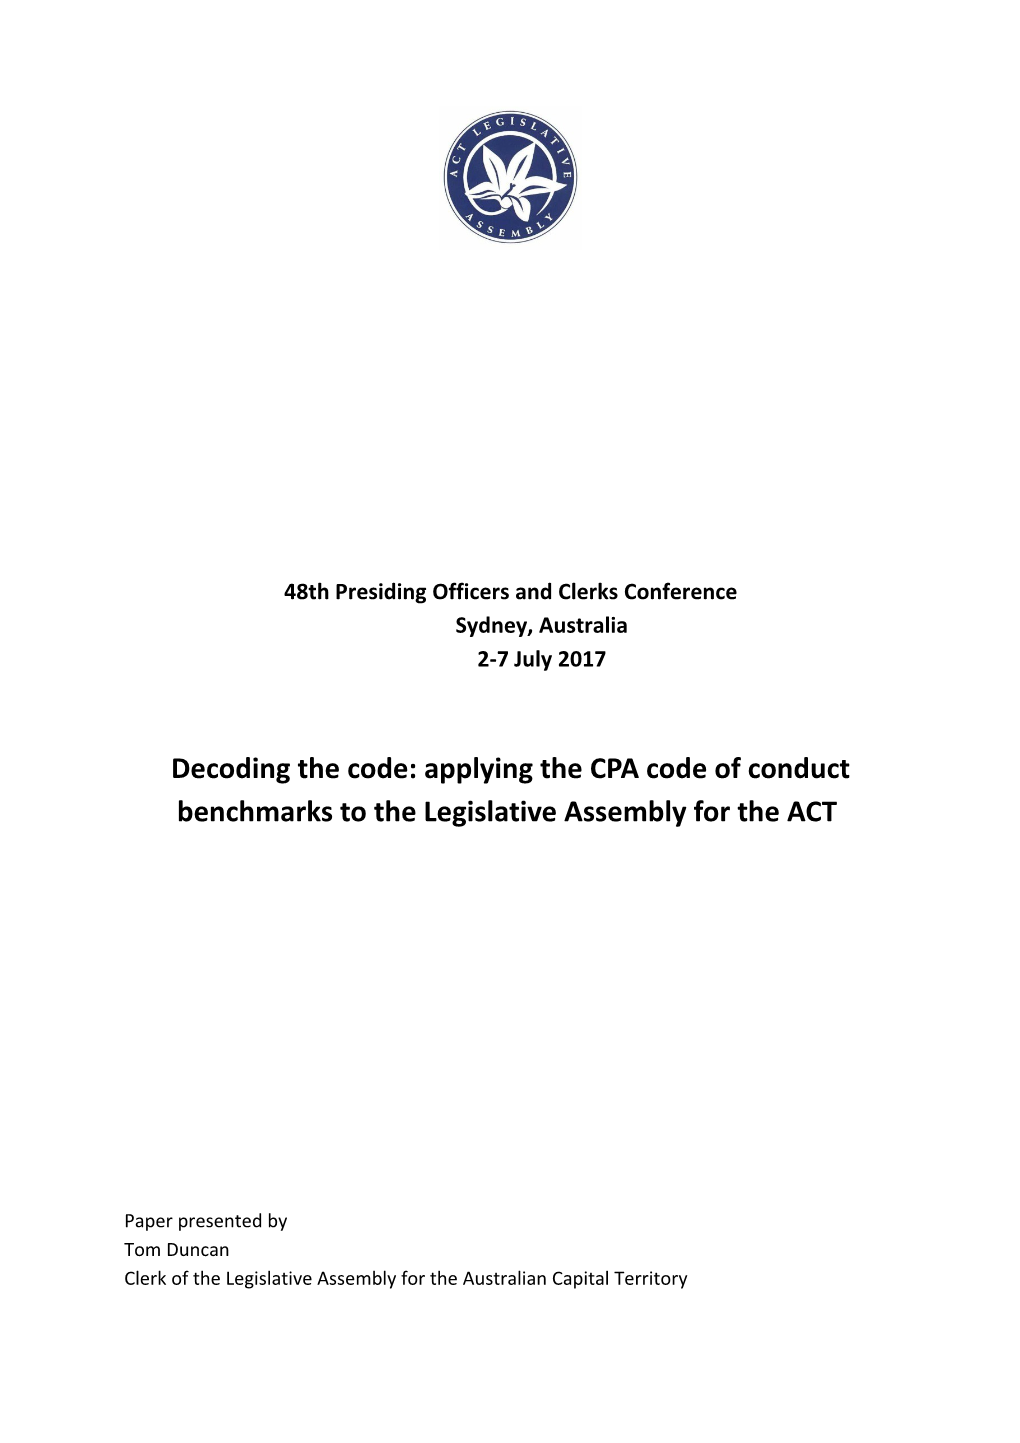 Decoding the Code: Applying CPA Code of Conduct Benchmarks to ACT Legislative Assembly